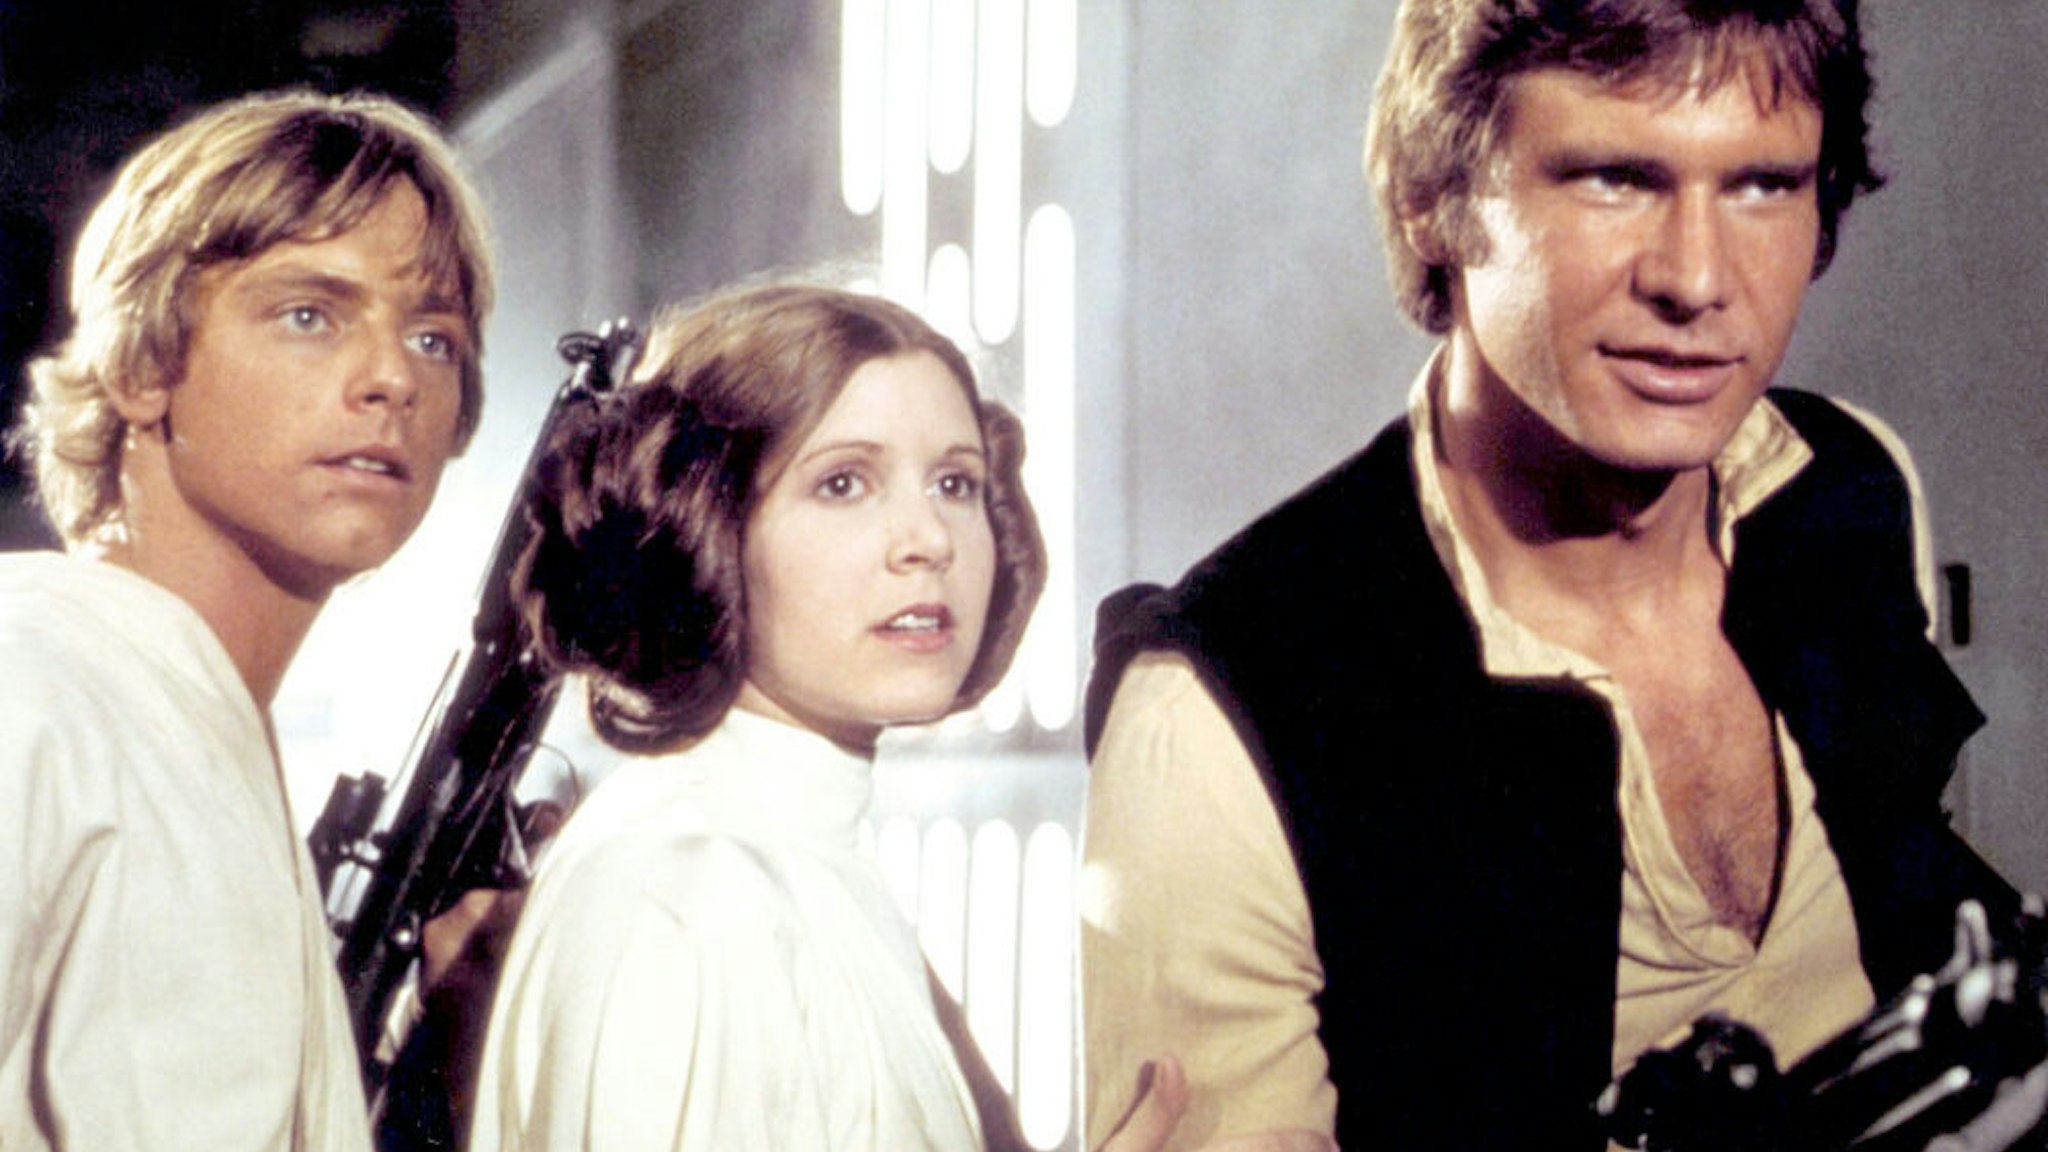 American actors Mark Hamill, Carrie Fisher and Harrison Ford on the set of Star Wars: Episode IV - A New Hope written, directed and produced by Georges Lucas.